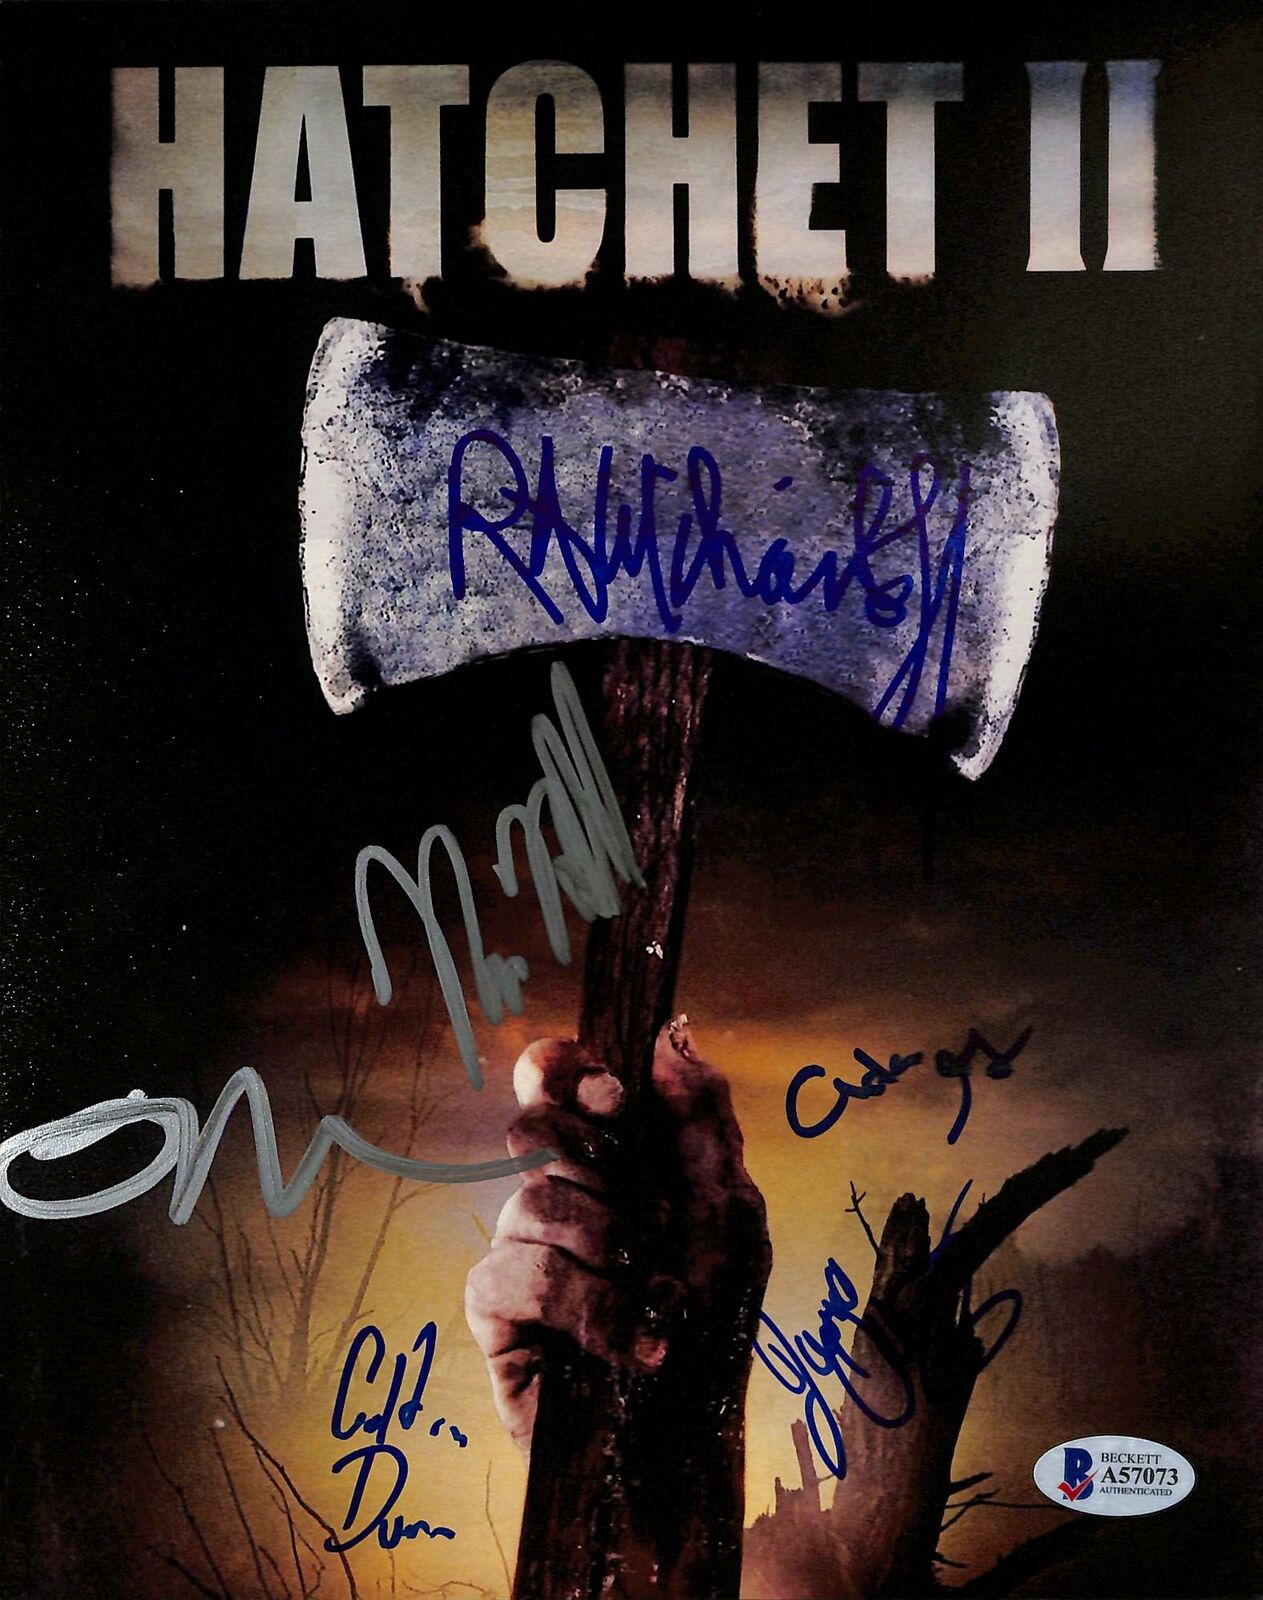 Hatchet 2 (6) Kane Hodder, Mears +4 Authentic Signed 8x10 Photo Poster painting BAS #A57073